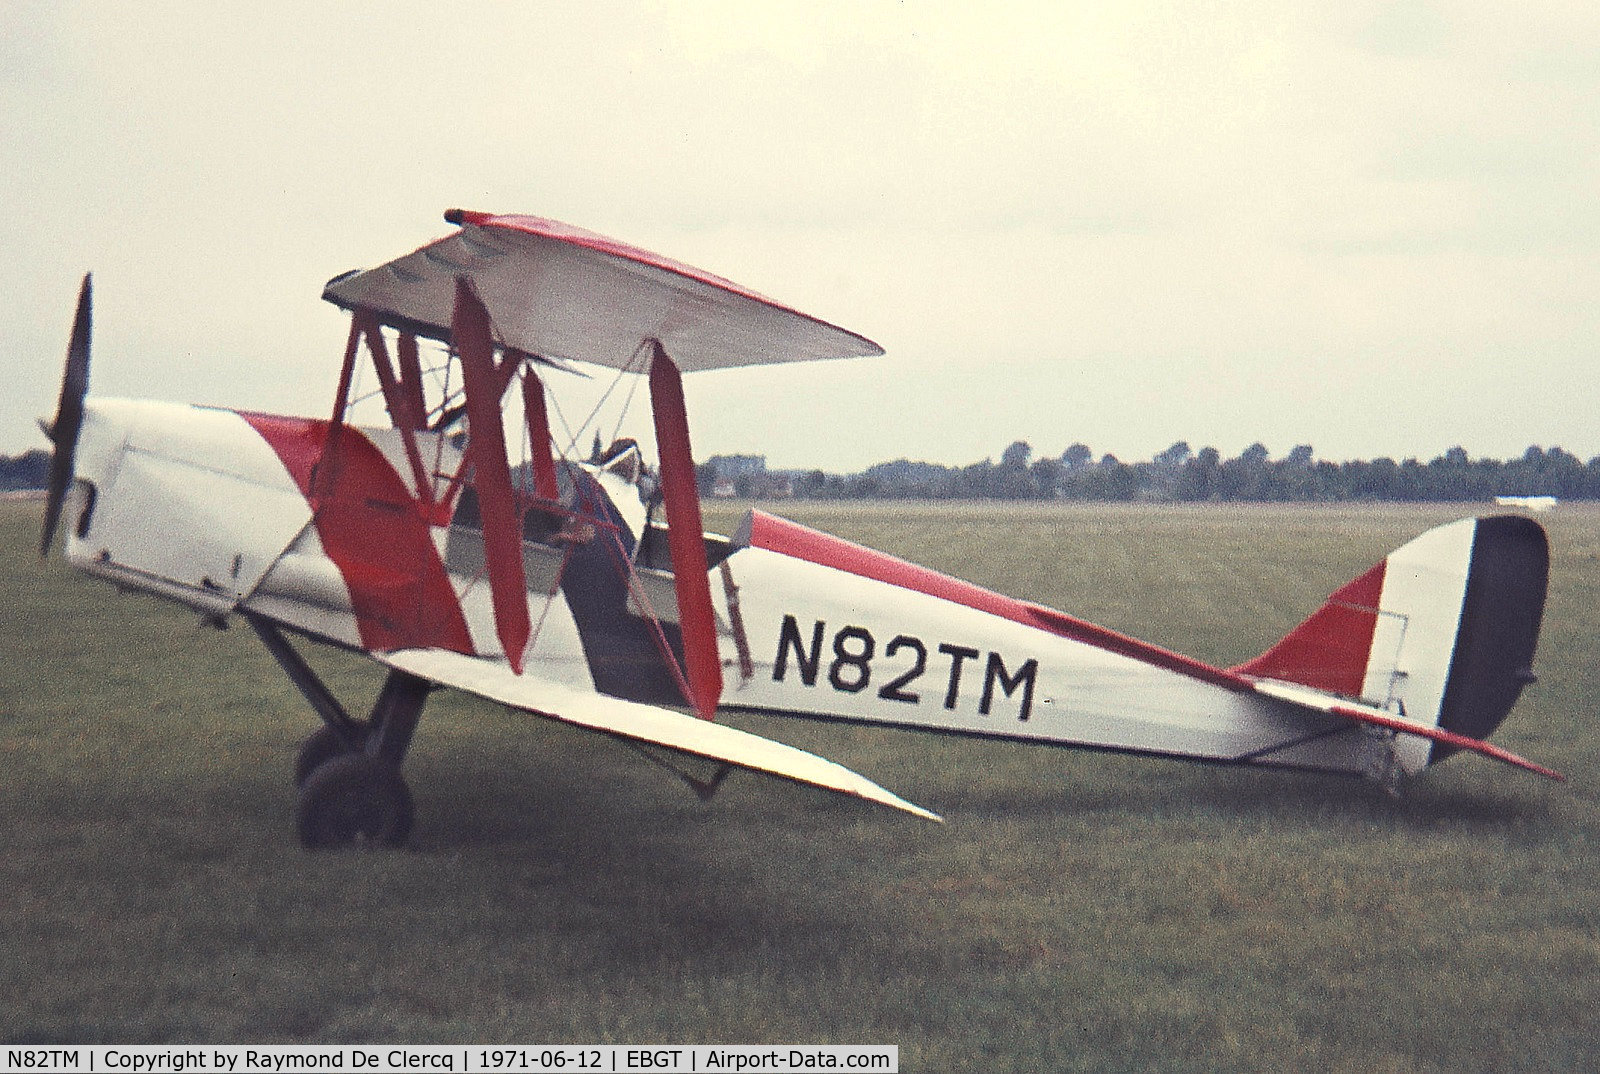 N82TM, 1938 De Havilland DH-82A Tiger Moth II C/N 3815, This is the Tiger Moth with c/n 3815. Sorry , my mistake.
At Ghent airfield in 1971.